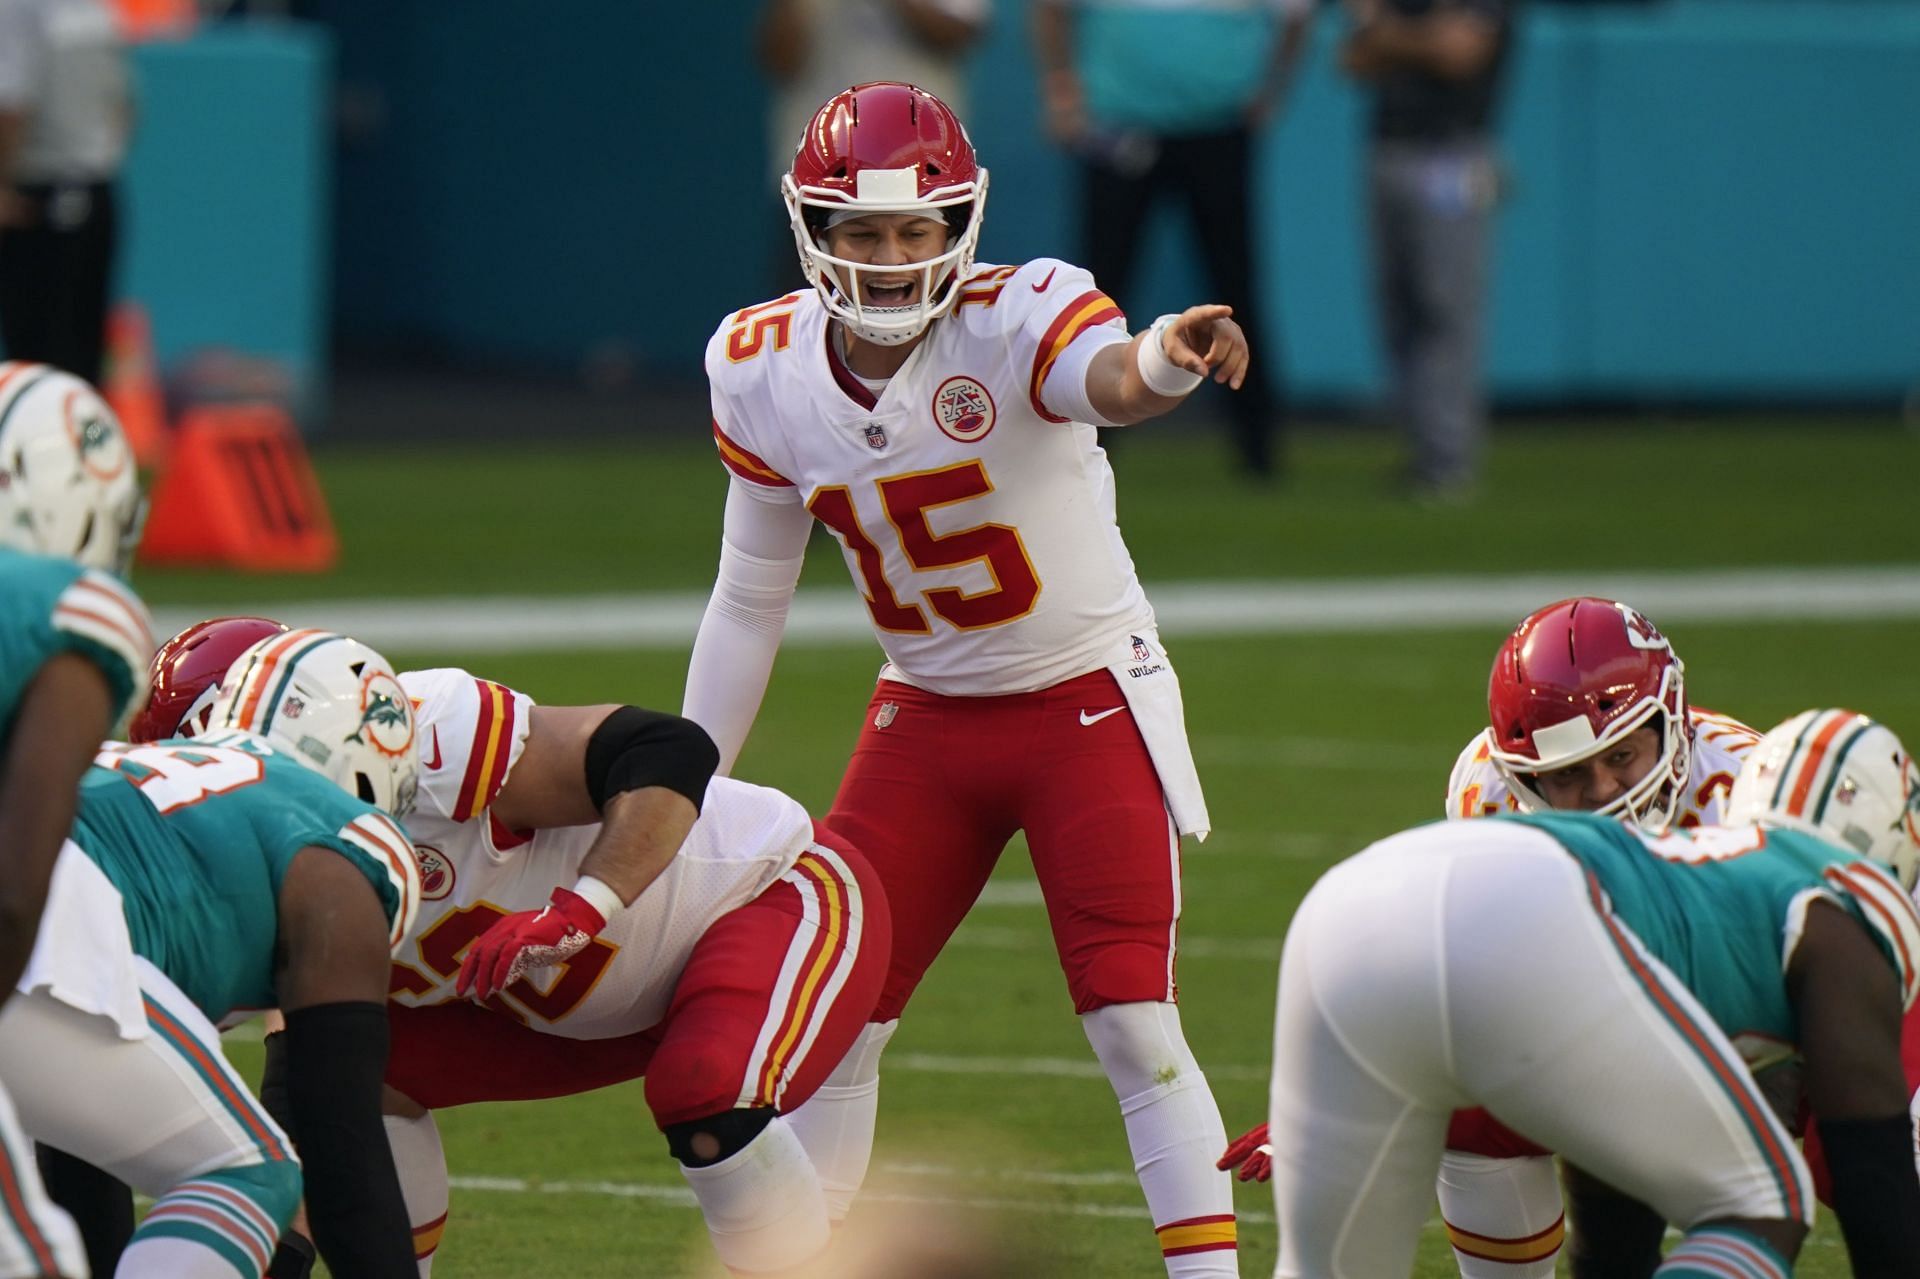 NFL Inactives today: Who is out for Chiefs vs Dolphins in Week 9?